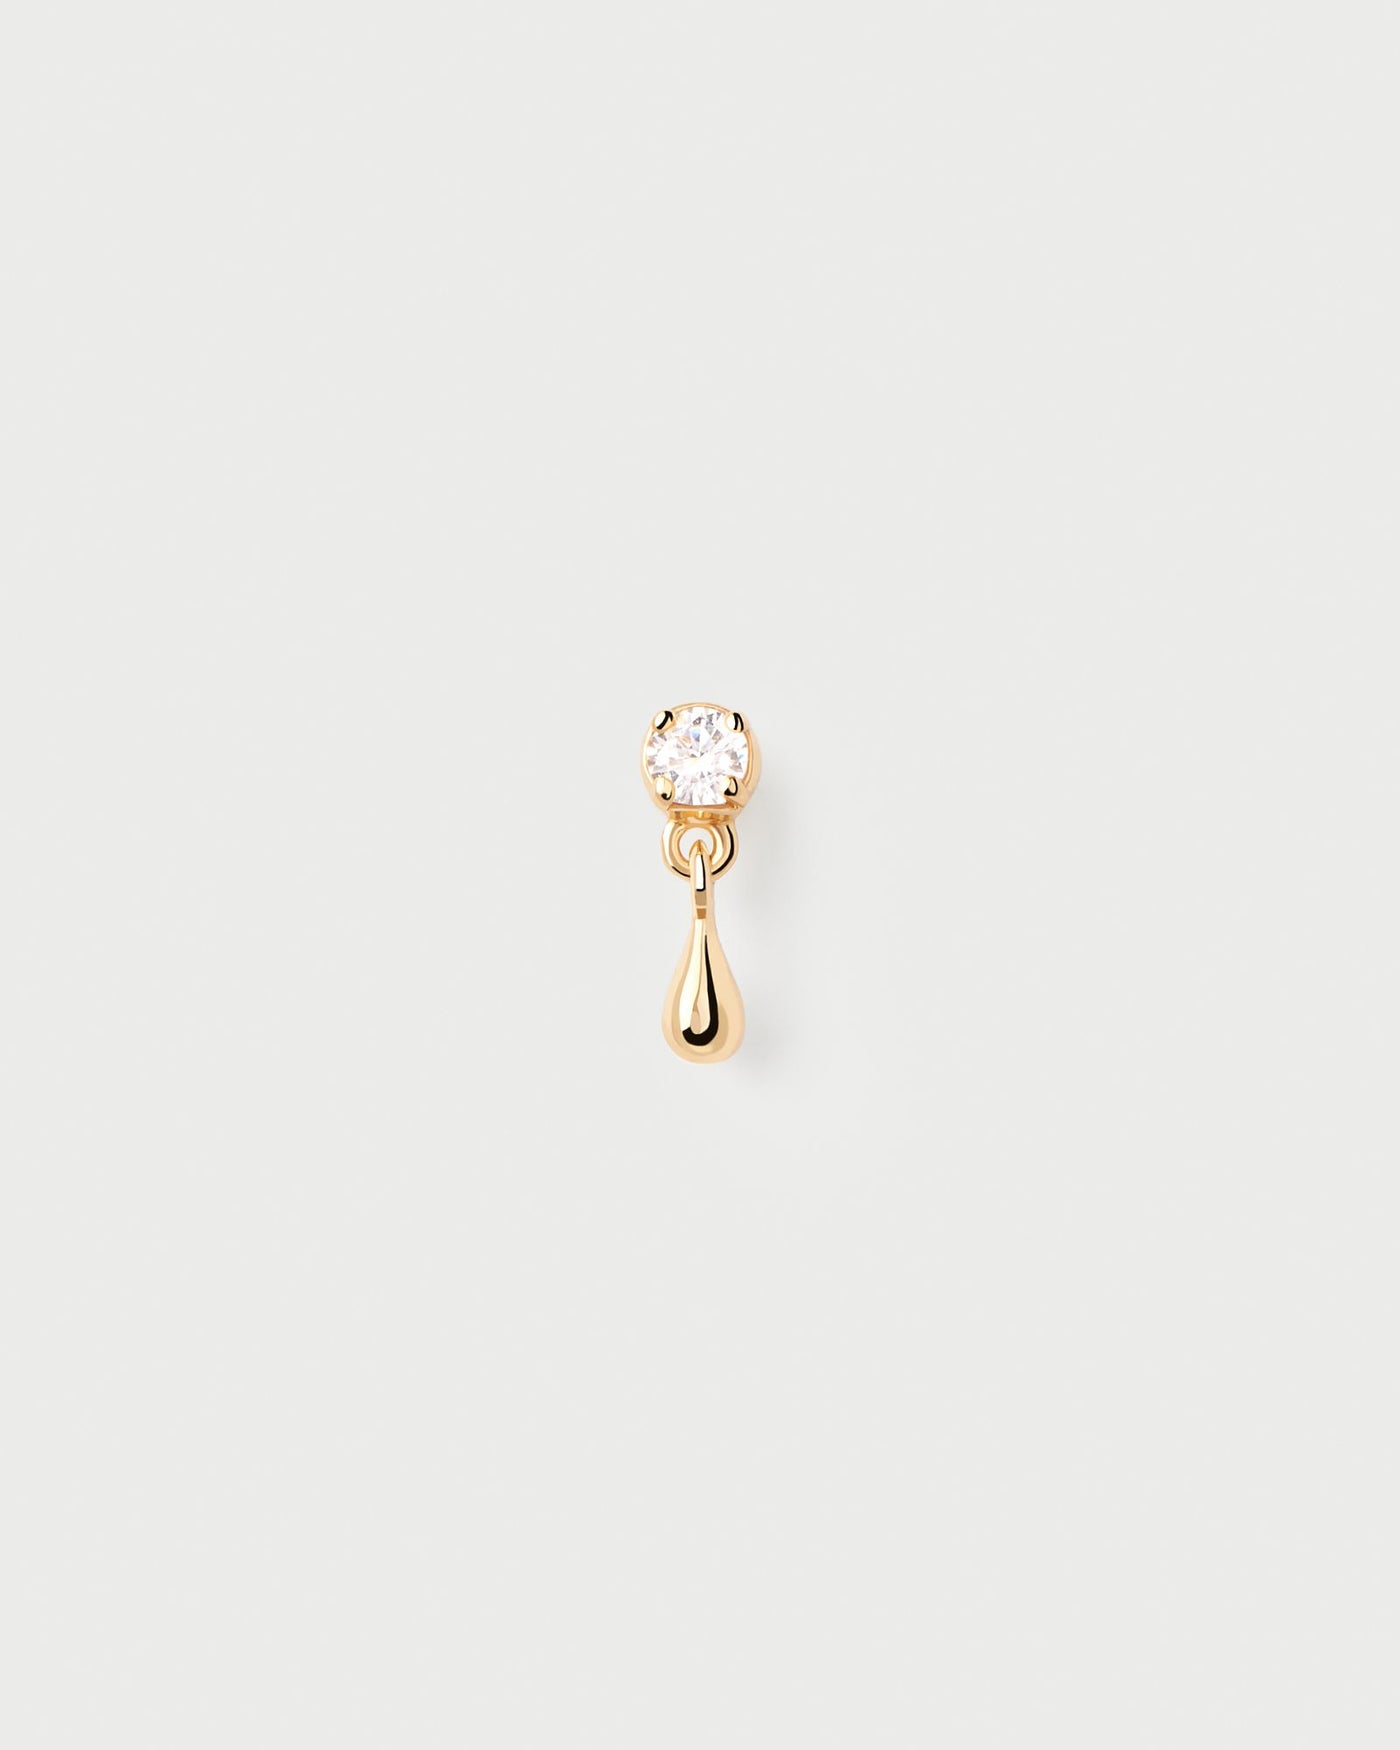 2024 Selection | Water single stud Earring. Gold-plated silver ear piercing with white zirconia and small drop pendant. Get the latest arrival from PDPAOLA. Place your order safely and get this Best Seller. Free Shipping.